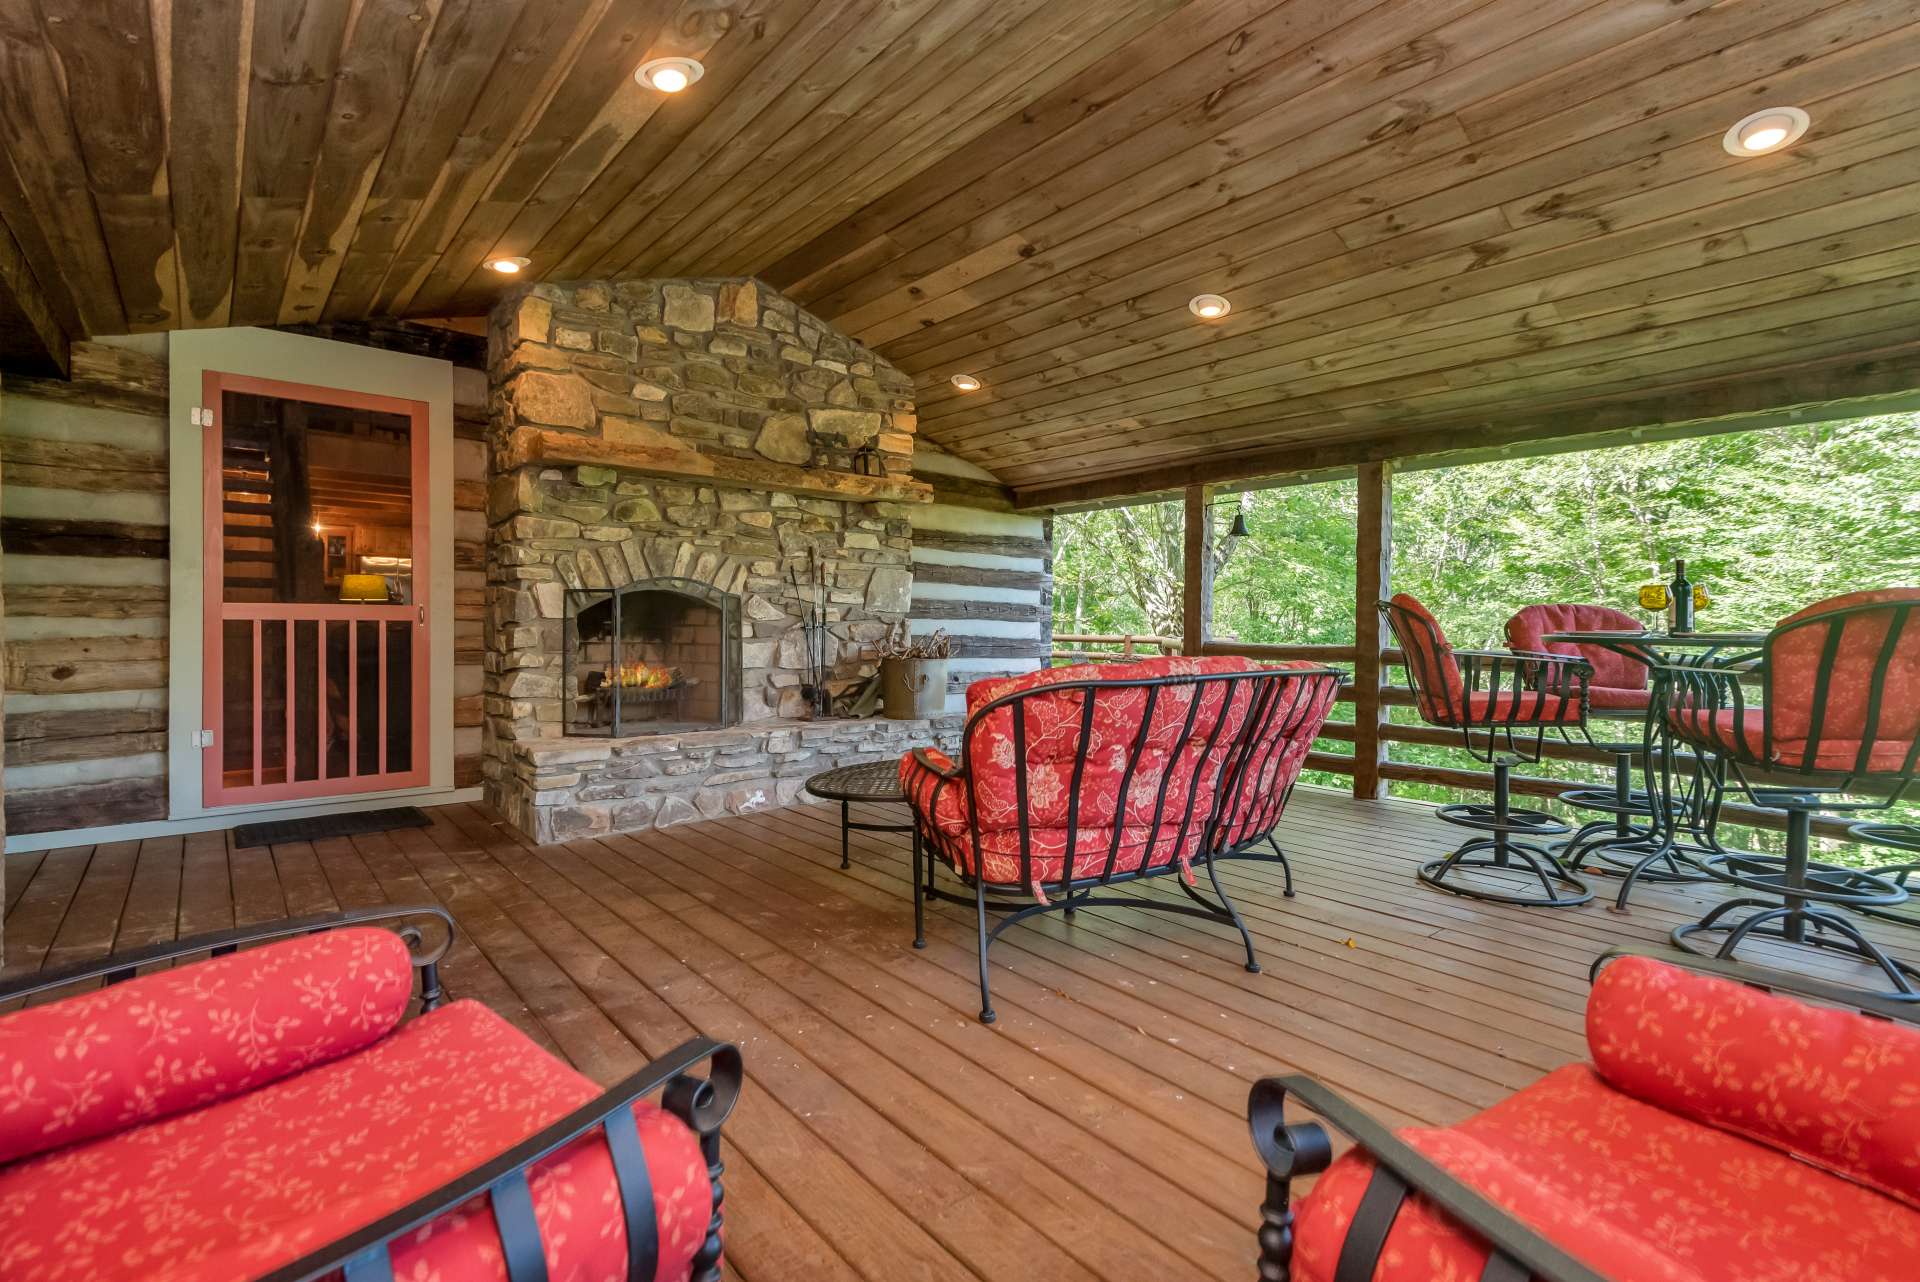 Enjoy evening drinks and conversations around the outdoor stone fireplace.